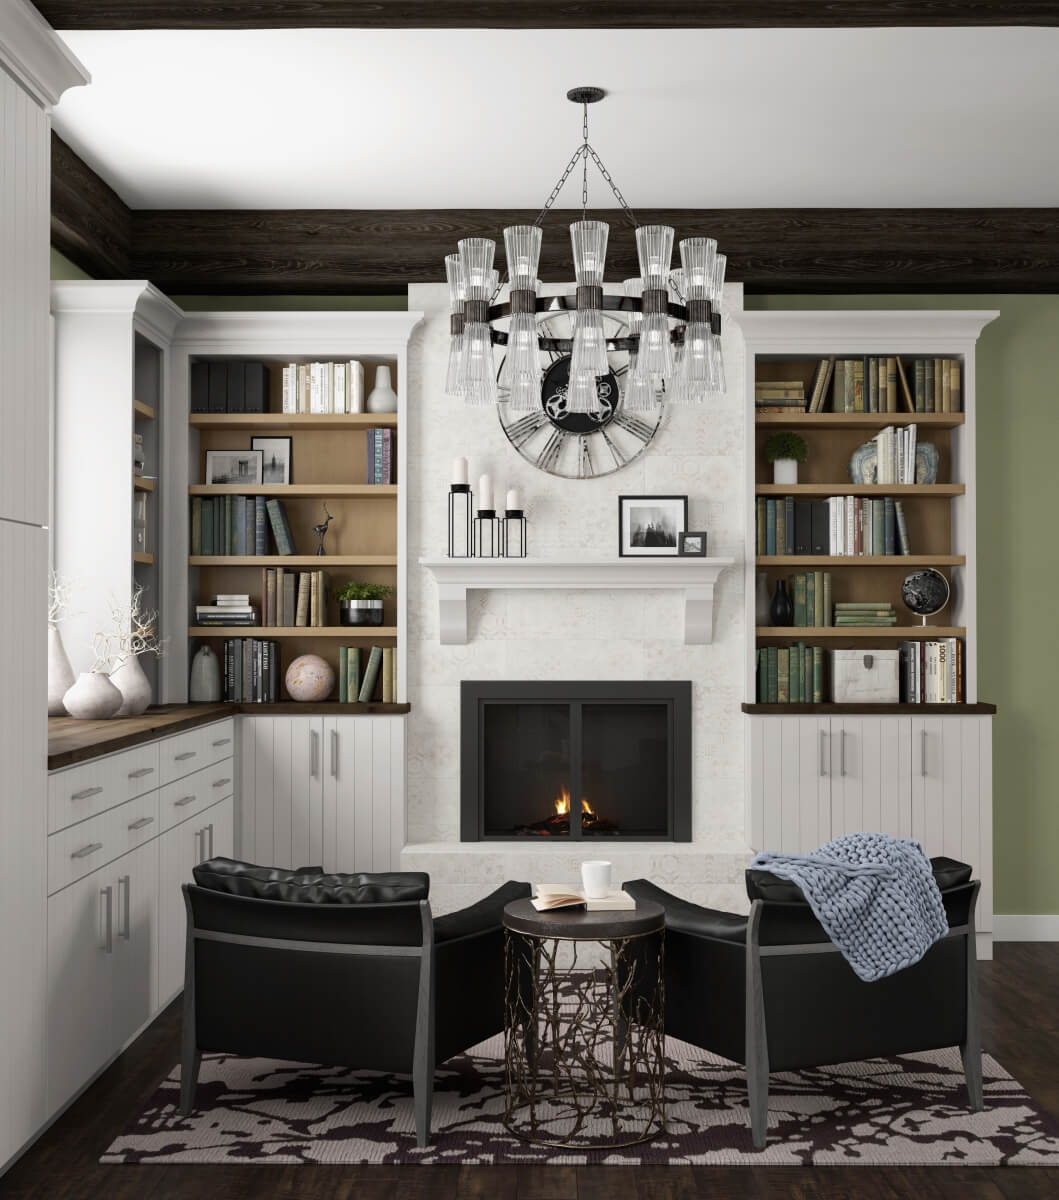 A reading nook and in the kitchen fireplace with living room seating area in an open concept home.